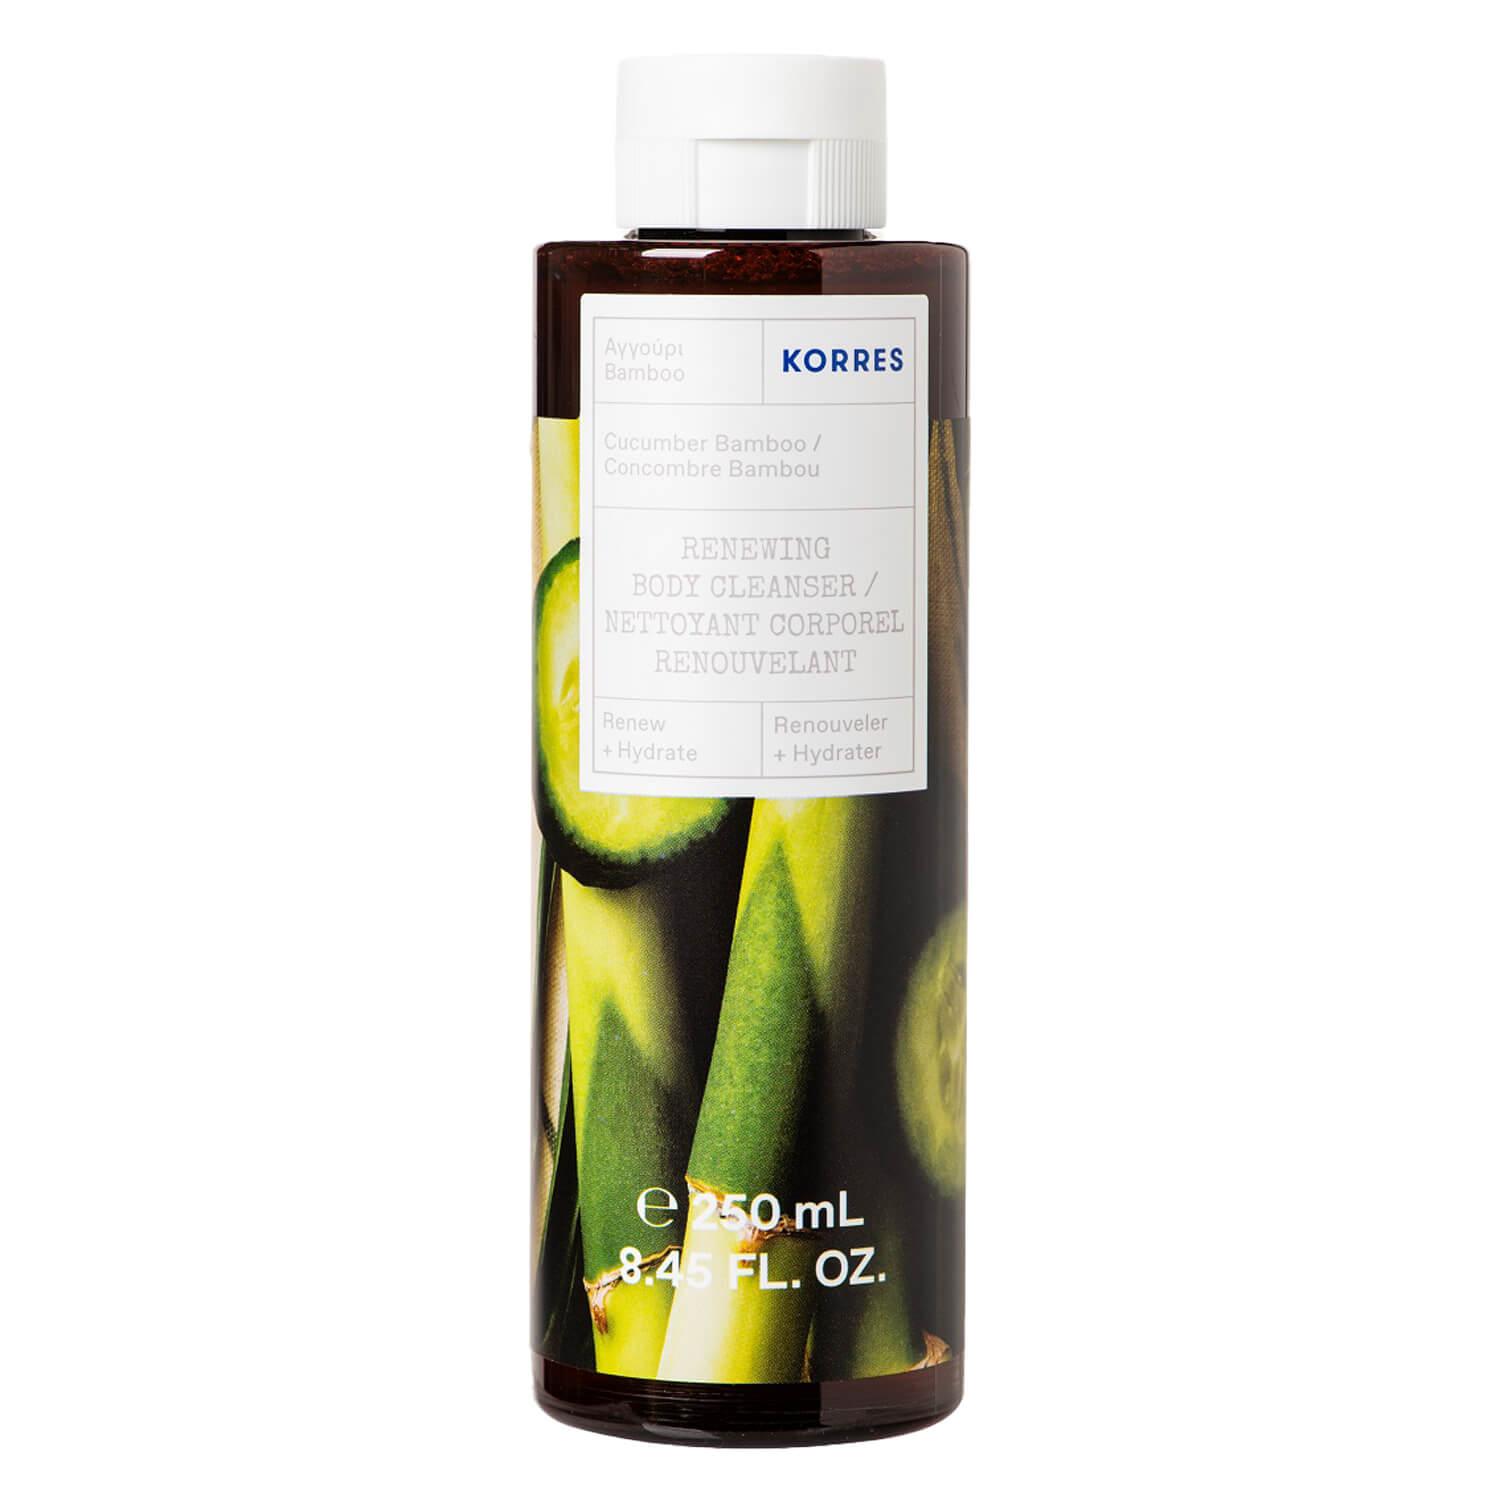 Korres Care - Cucumber Bamboo Renewing Body Cleanser